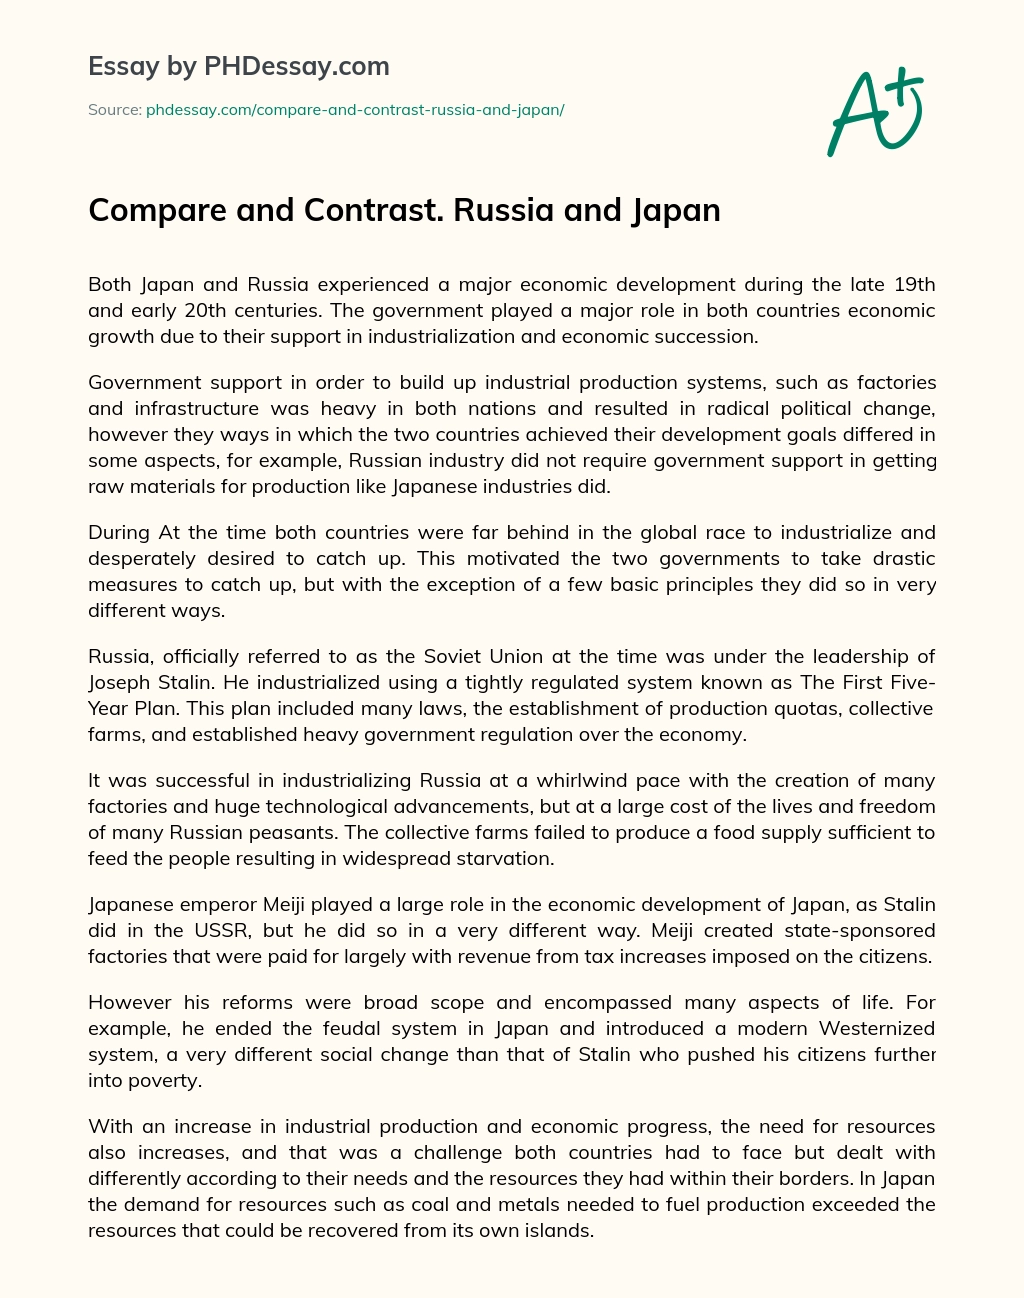 Compare and Contrast. Russia and Japan essay